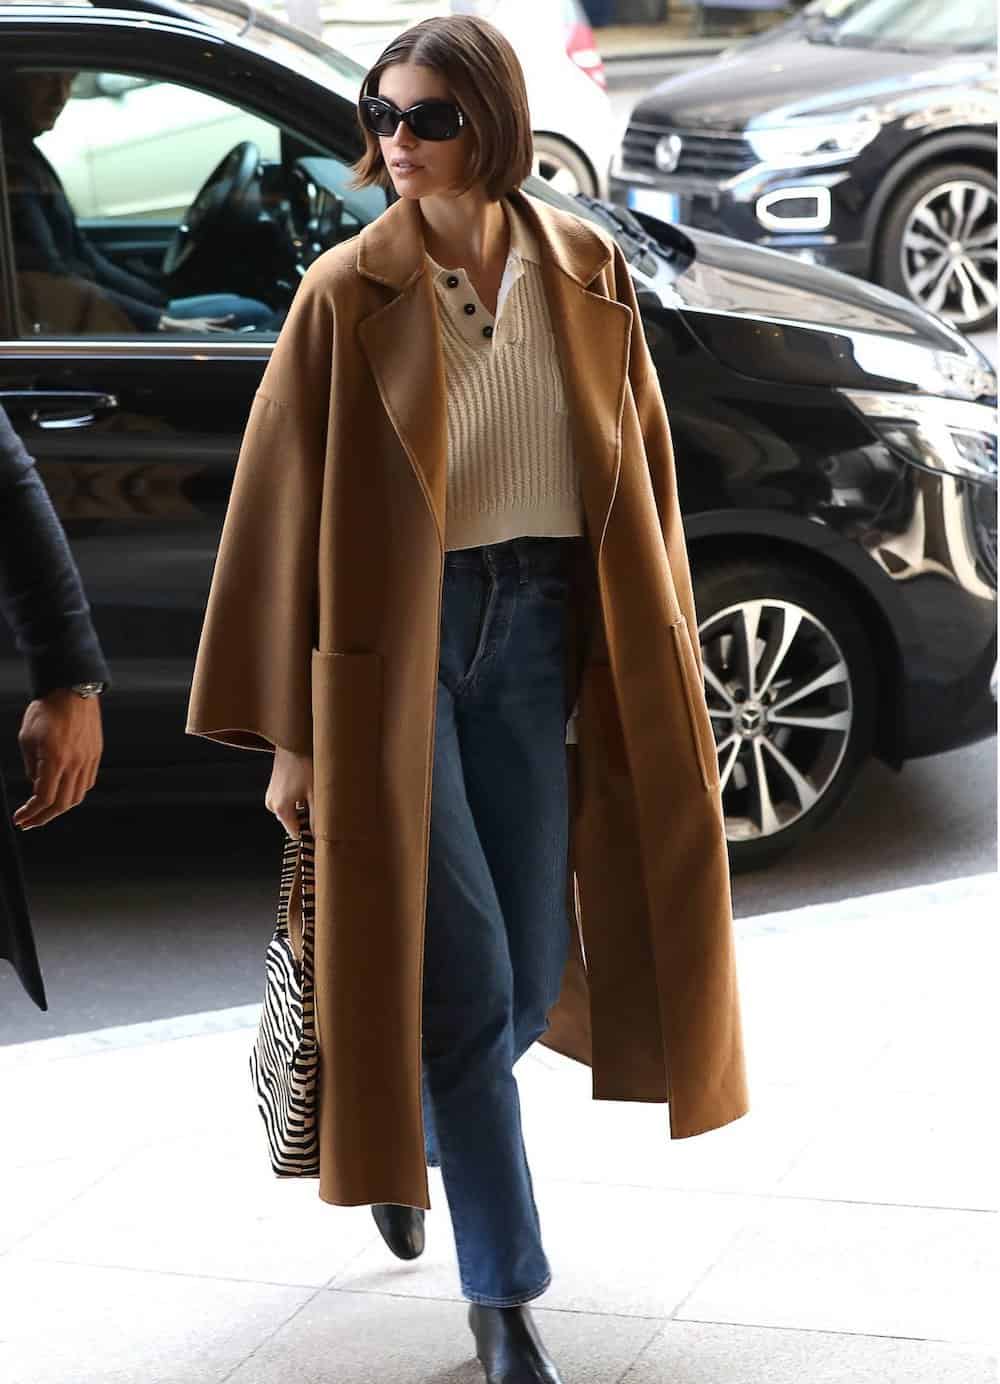 Off-duty model Kaia Gerber wearing jeans, a cropped sweater and a camel colored trench coat.